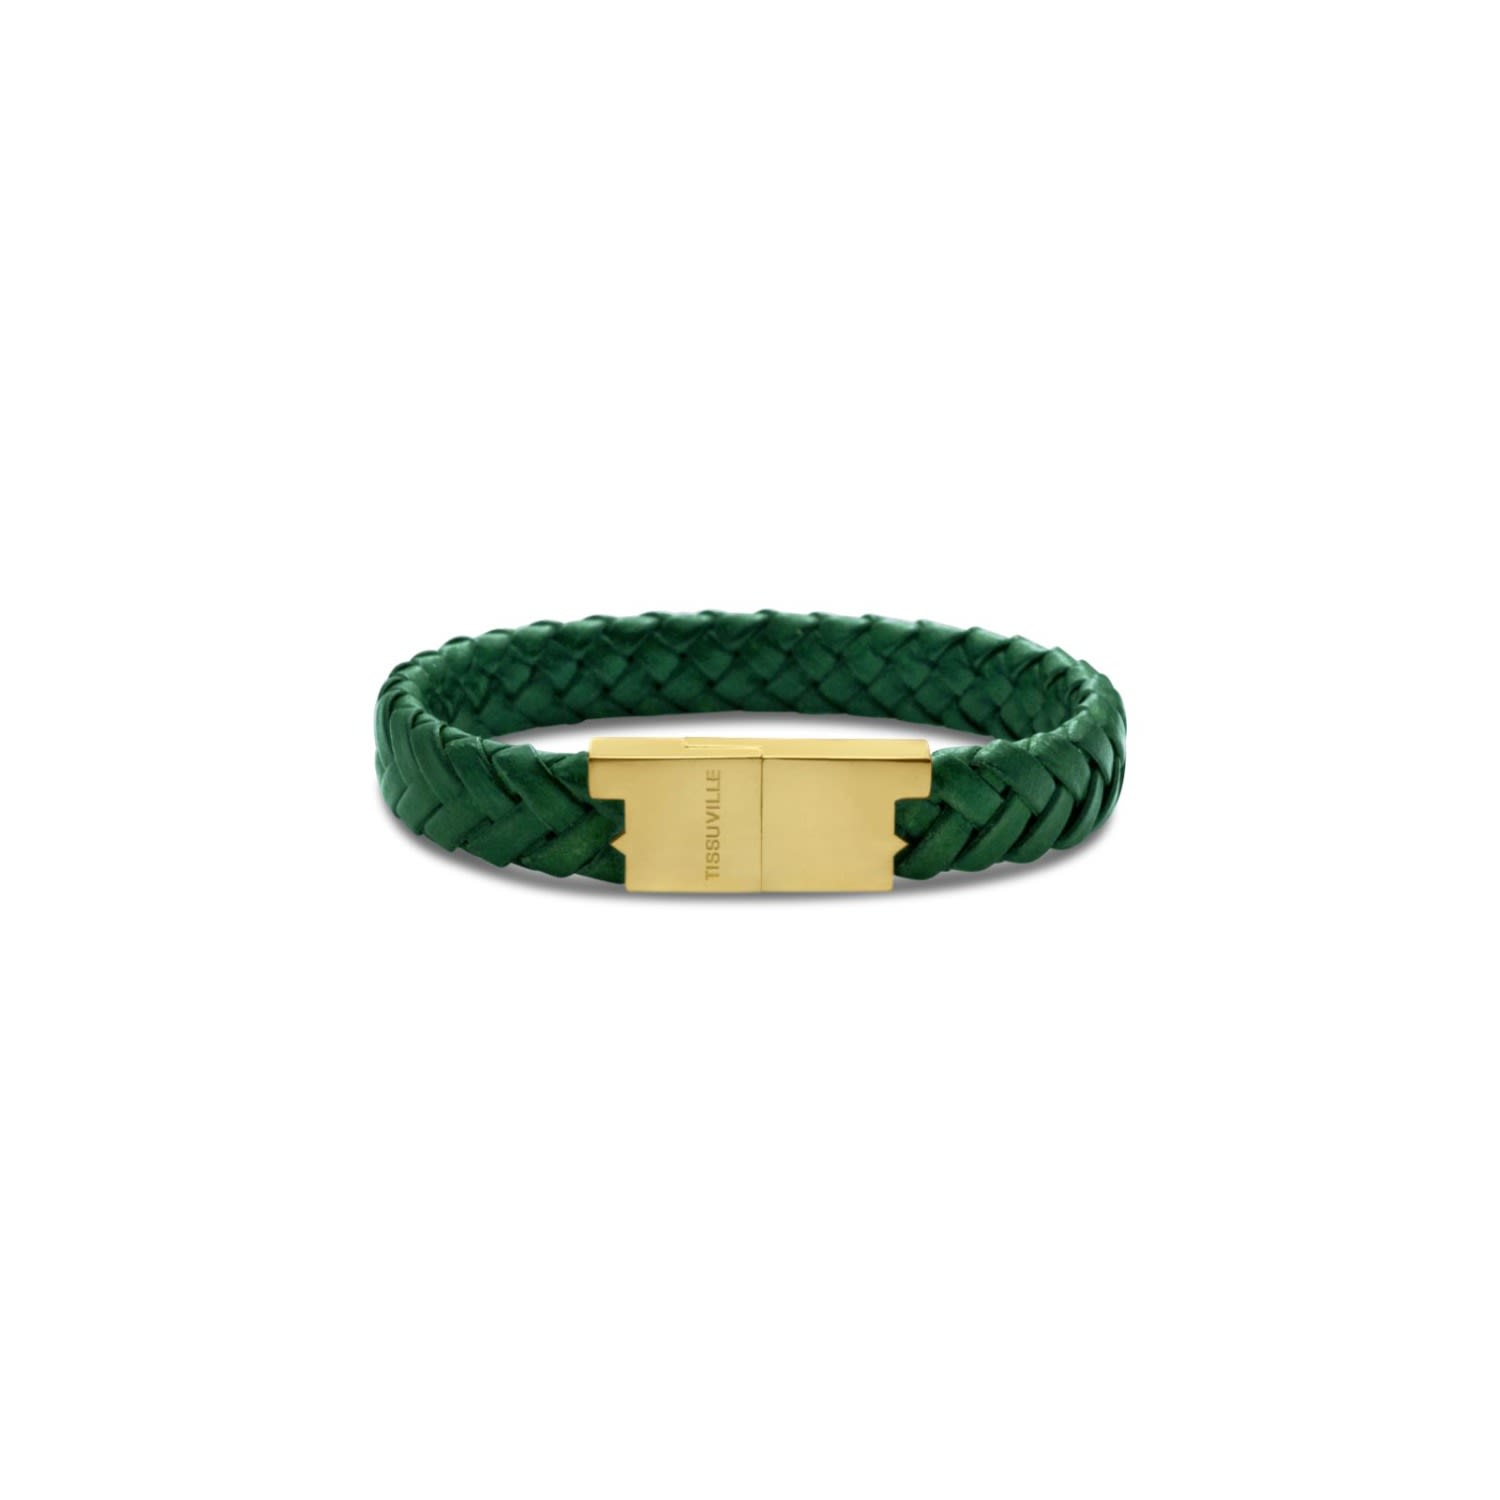 Men's Racing Green Braided Leather Bracelet With Gold-Tone Hardware Serac- Green Tissuville